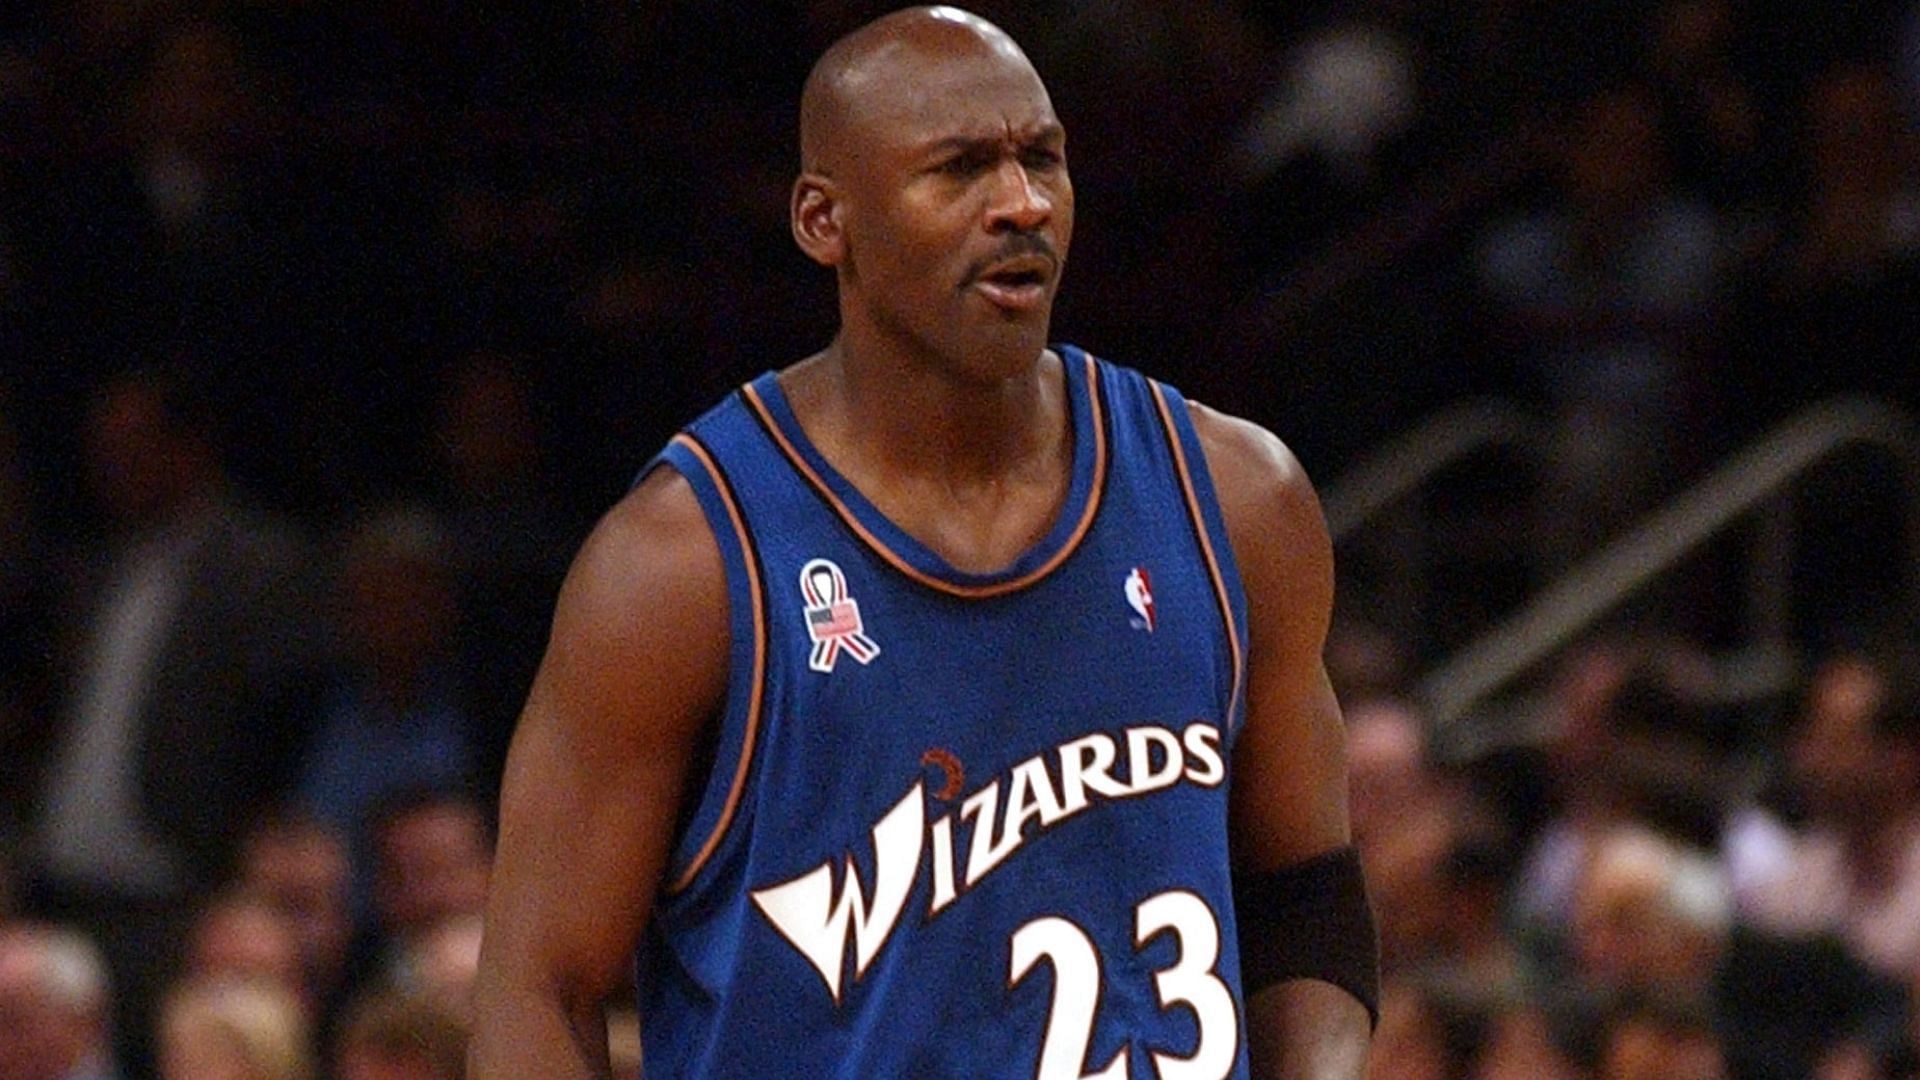 Michael Jordan during his time with the Washington Wizards